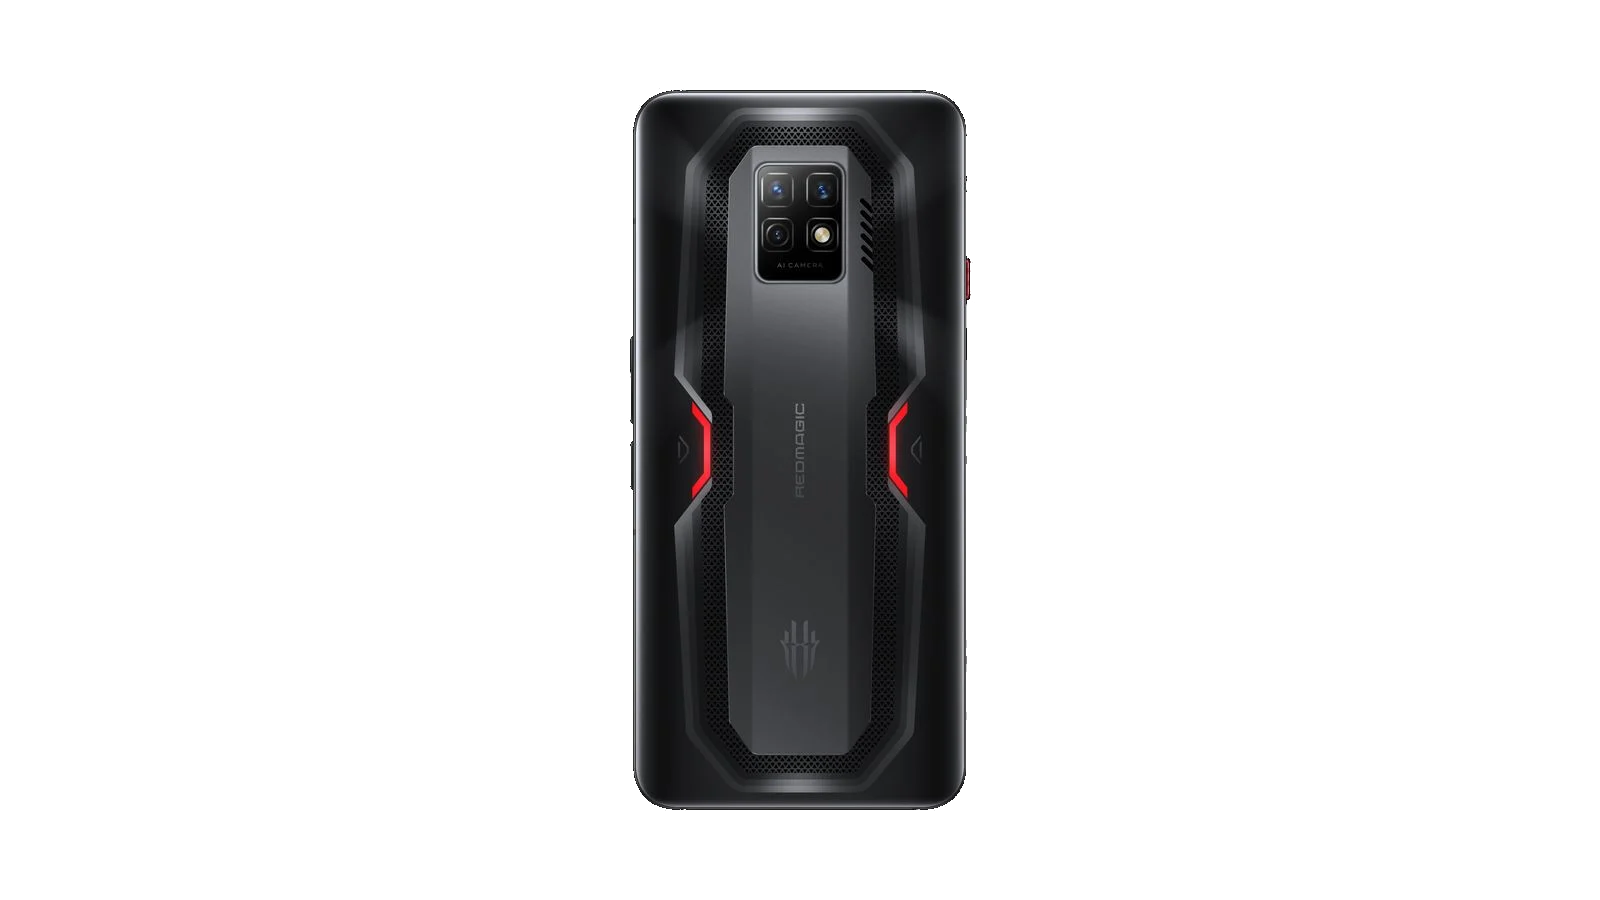 The Nubia RedMagic 7 wants to be the phone every gamer dreams of